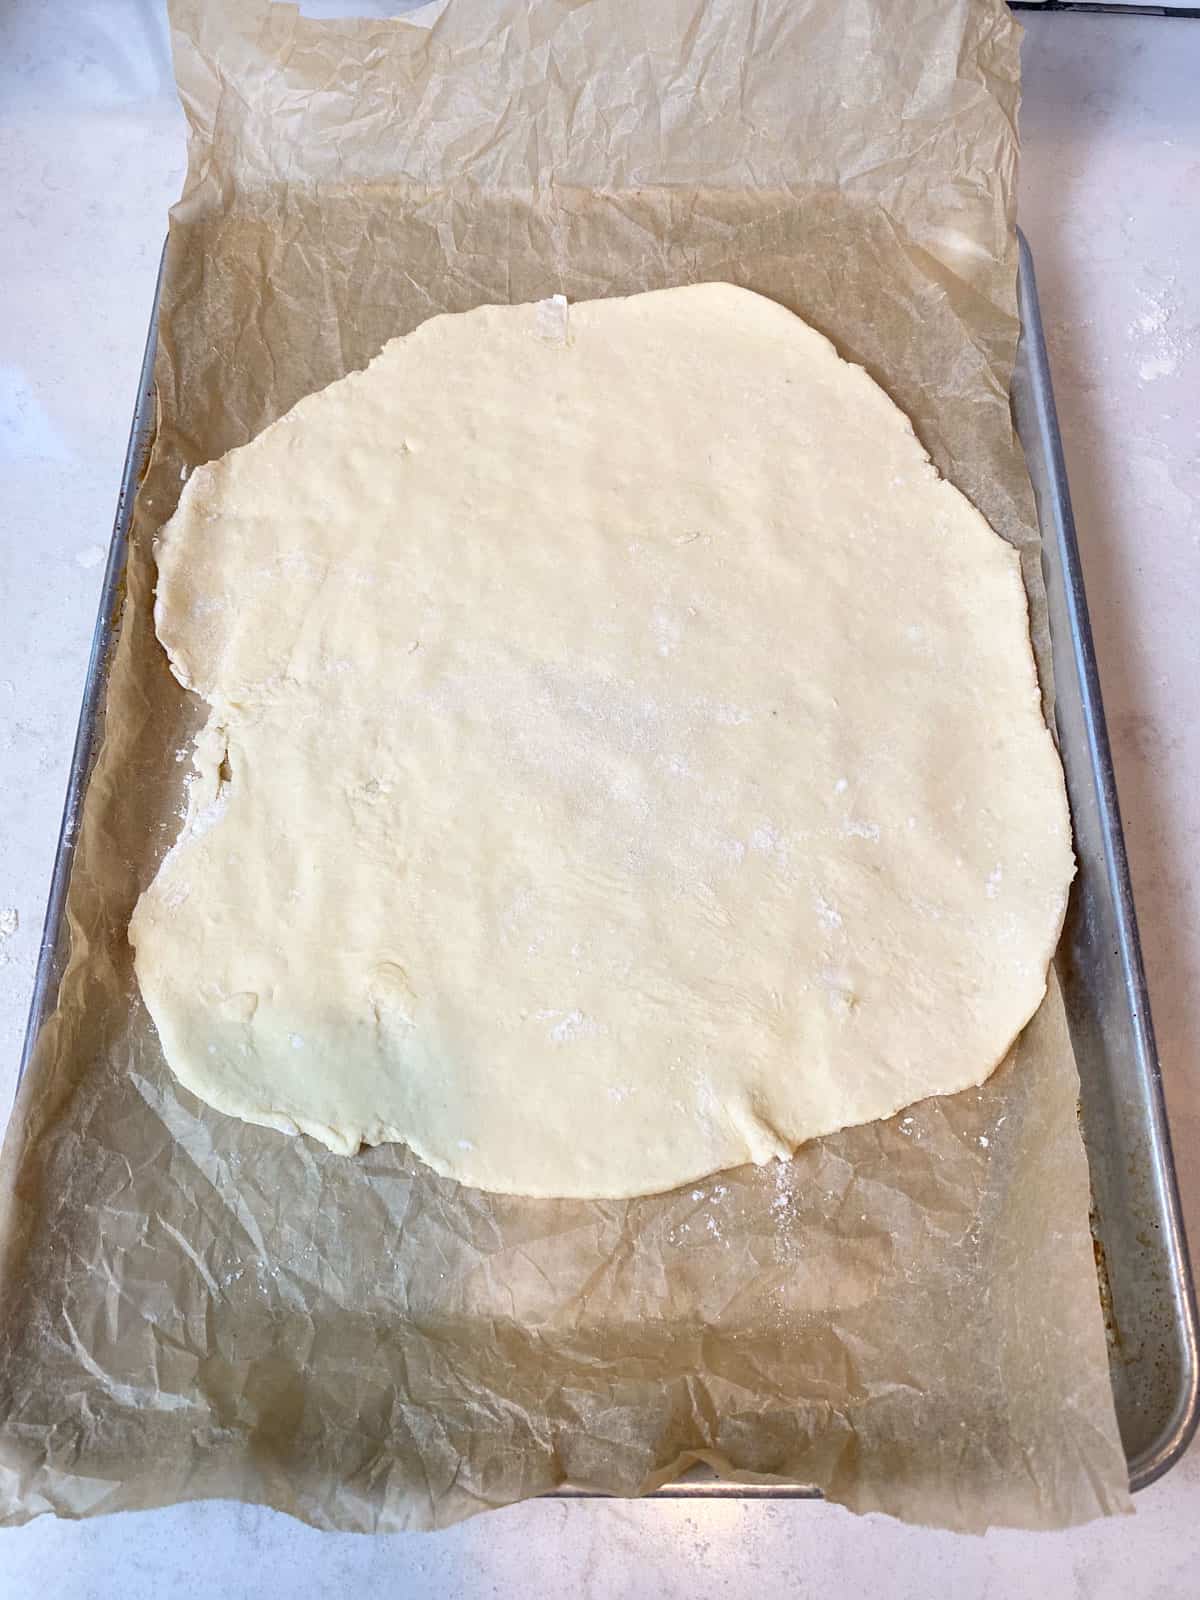 Transfer the dough to a lined baking sheet before layering.